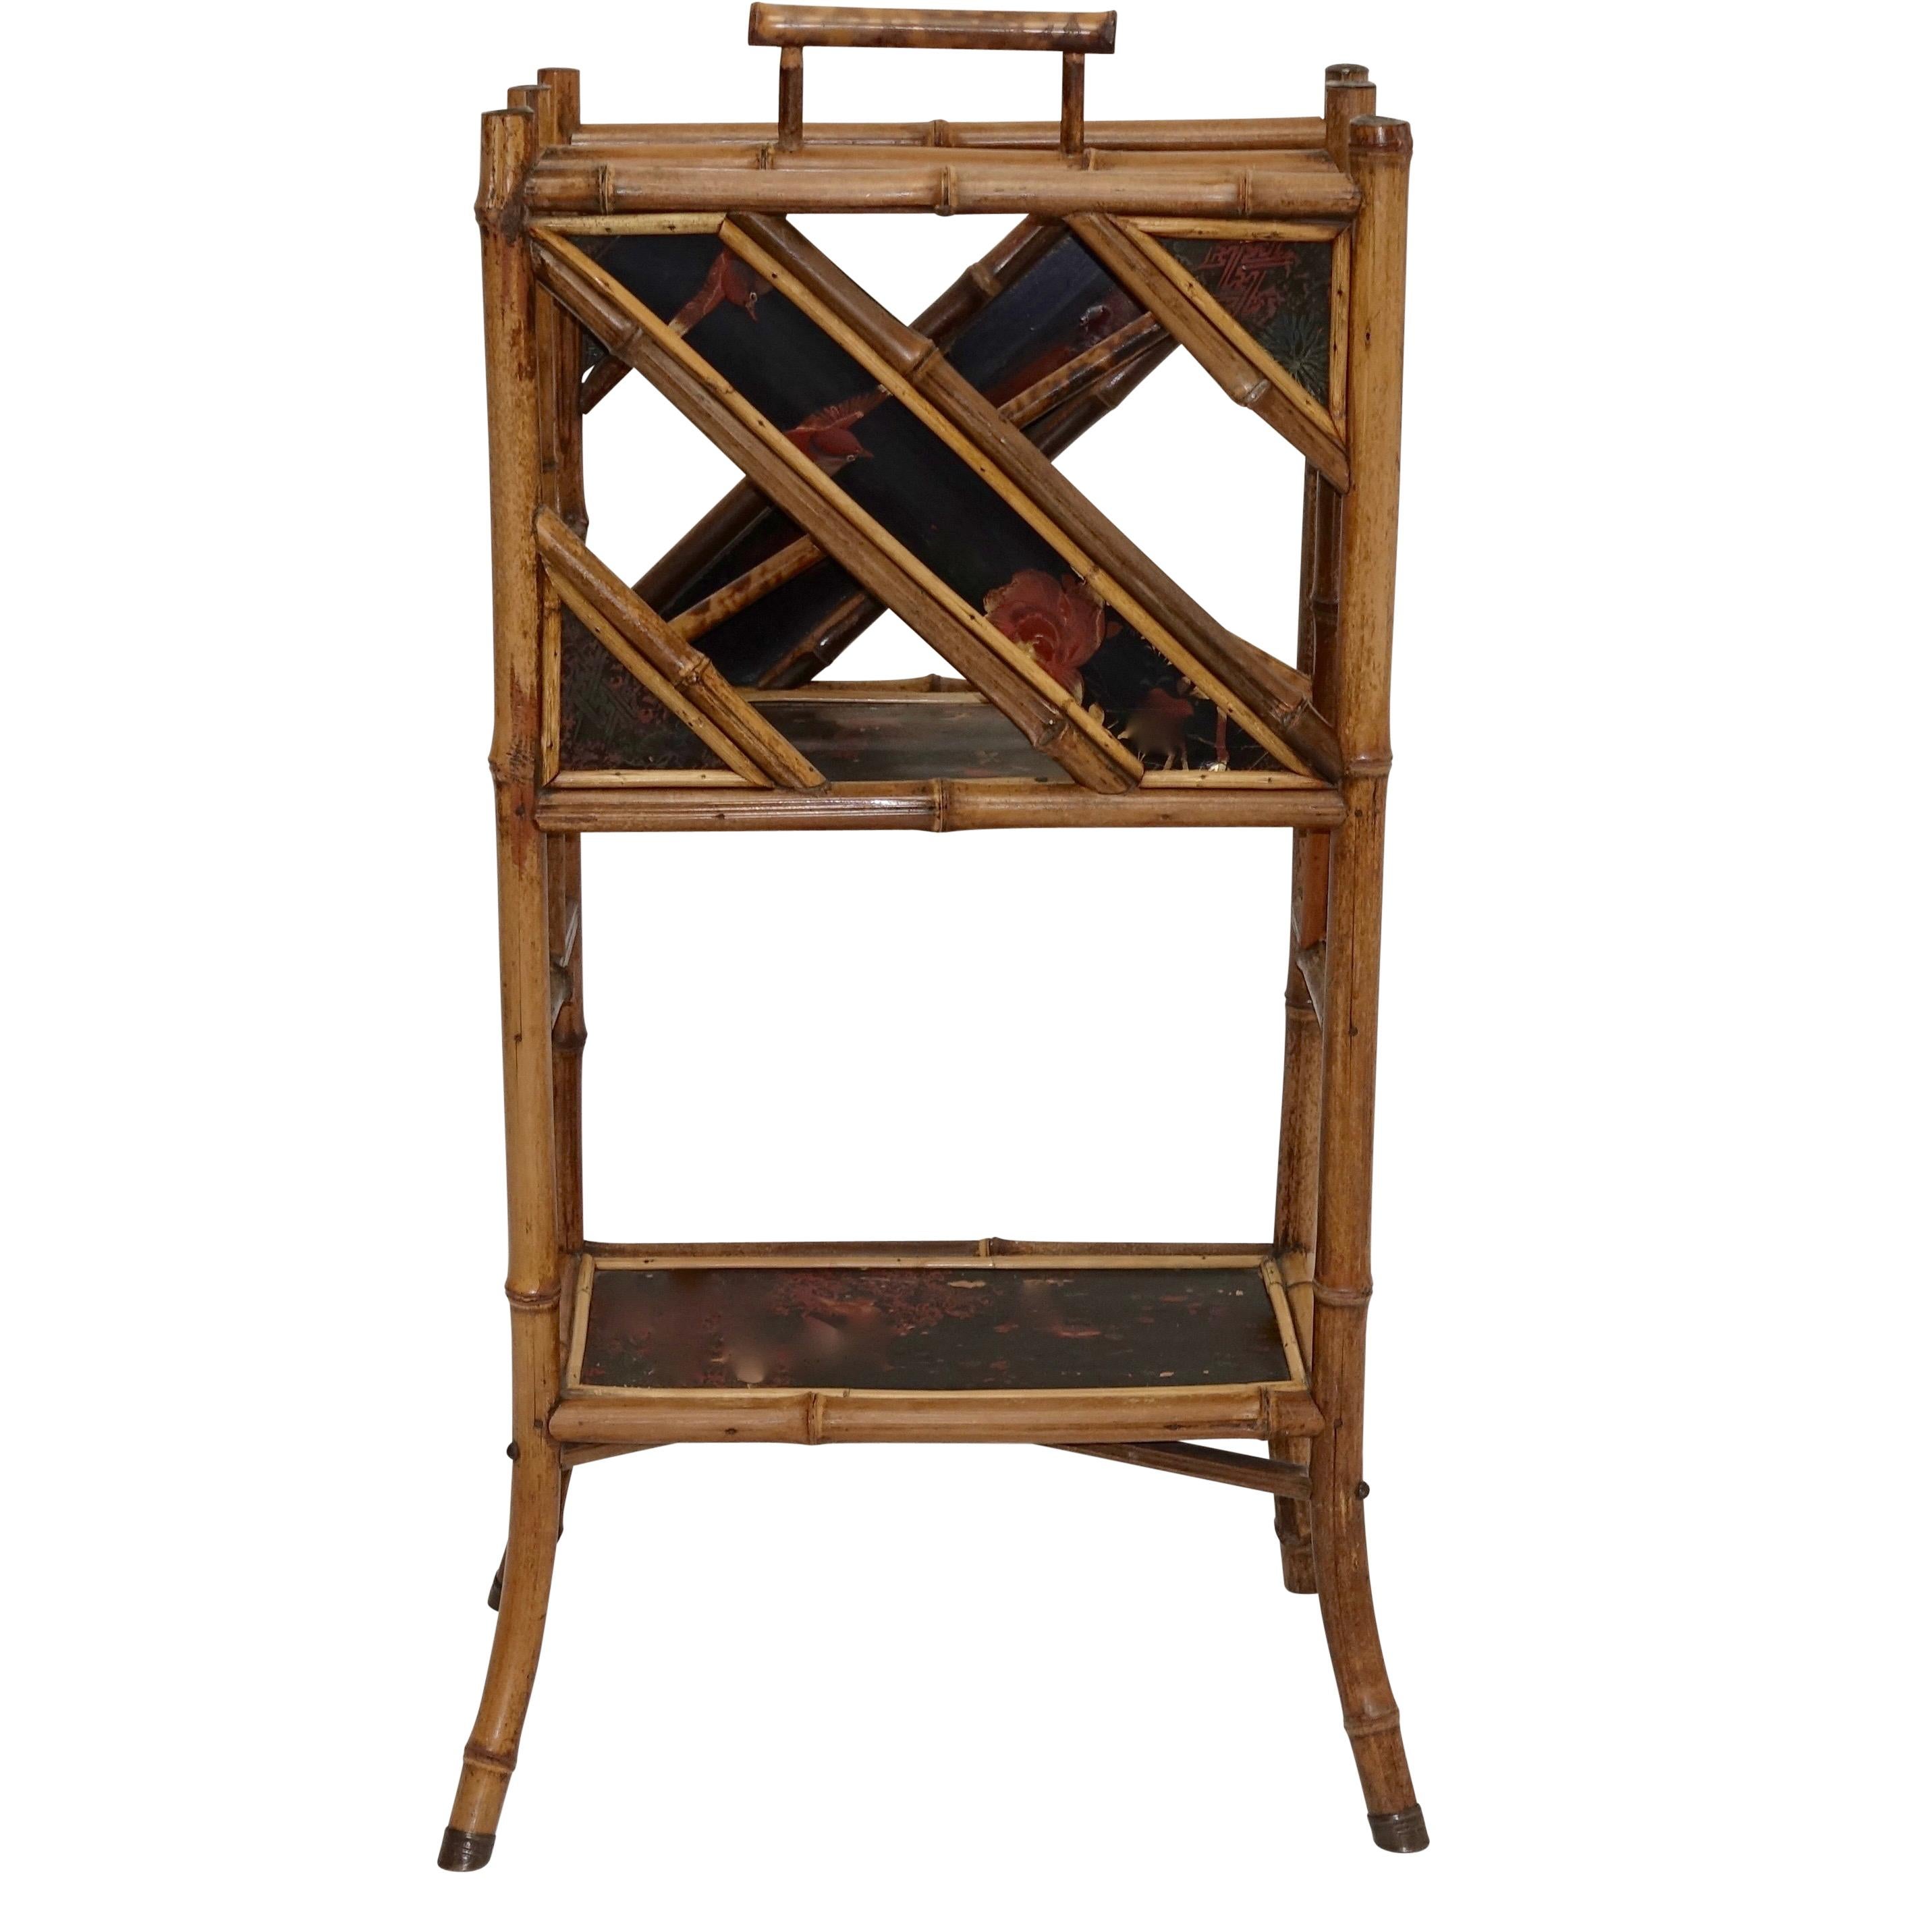 Victorian bamboo magazine stand with inset Japanese lacquer panels, side panels running on a diagonal with two lacquer panels. Embossed brass disks decorate the top of the bamboo ends and brass feet on the ends of the bamboo legs. English, circa